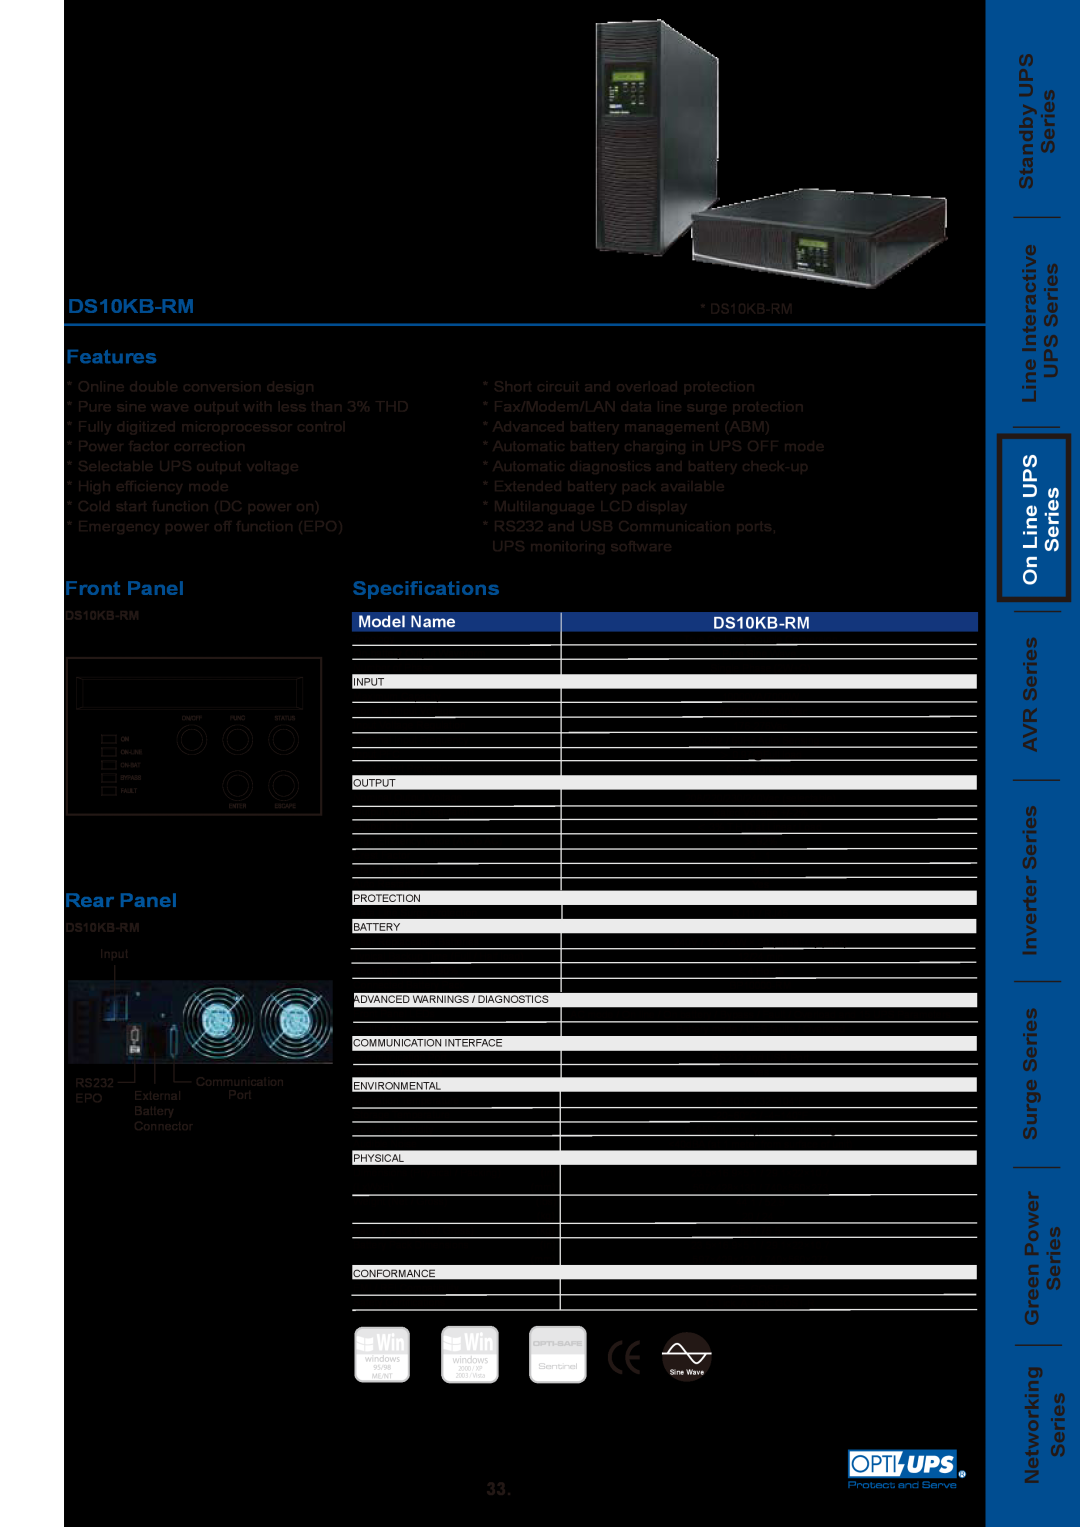 OPTI-UPS DS10KB-RM specifications Interactive Standby UPS UPS Series Series, Line UPS Series, Features, Front Panel 